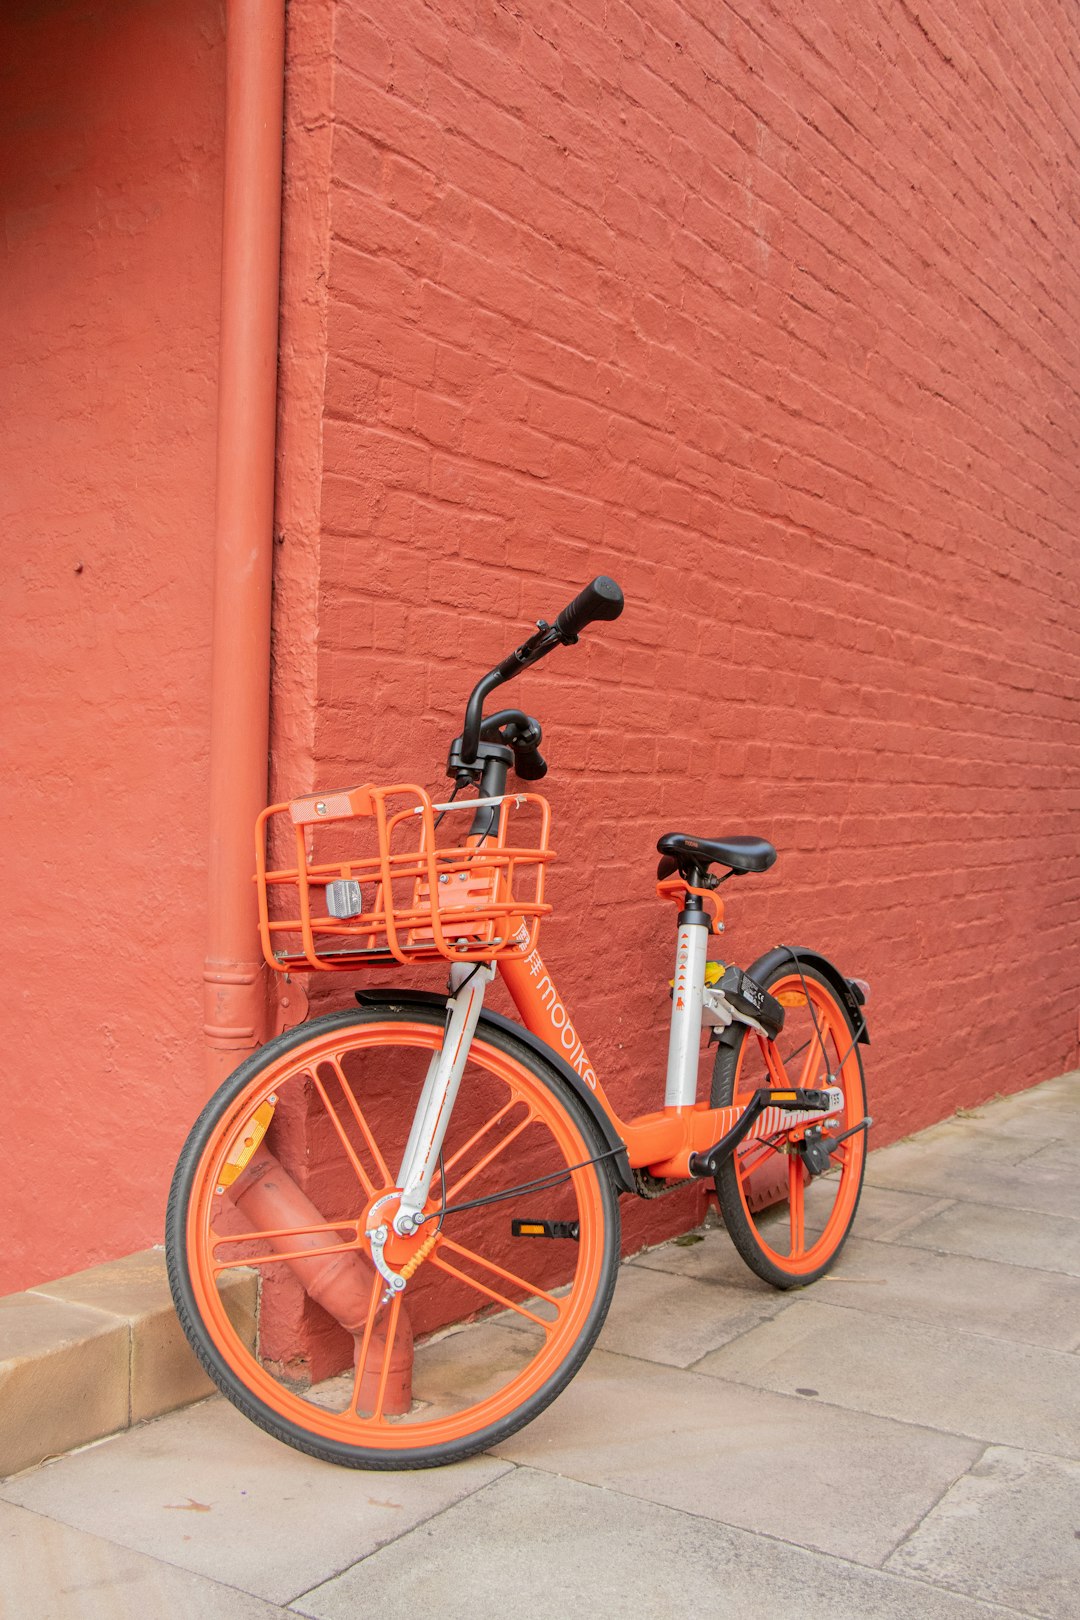 parked orange and white bicycle